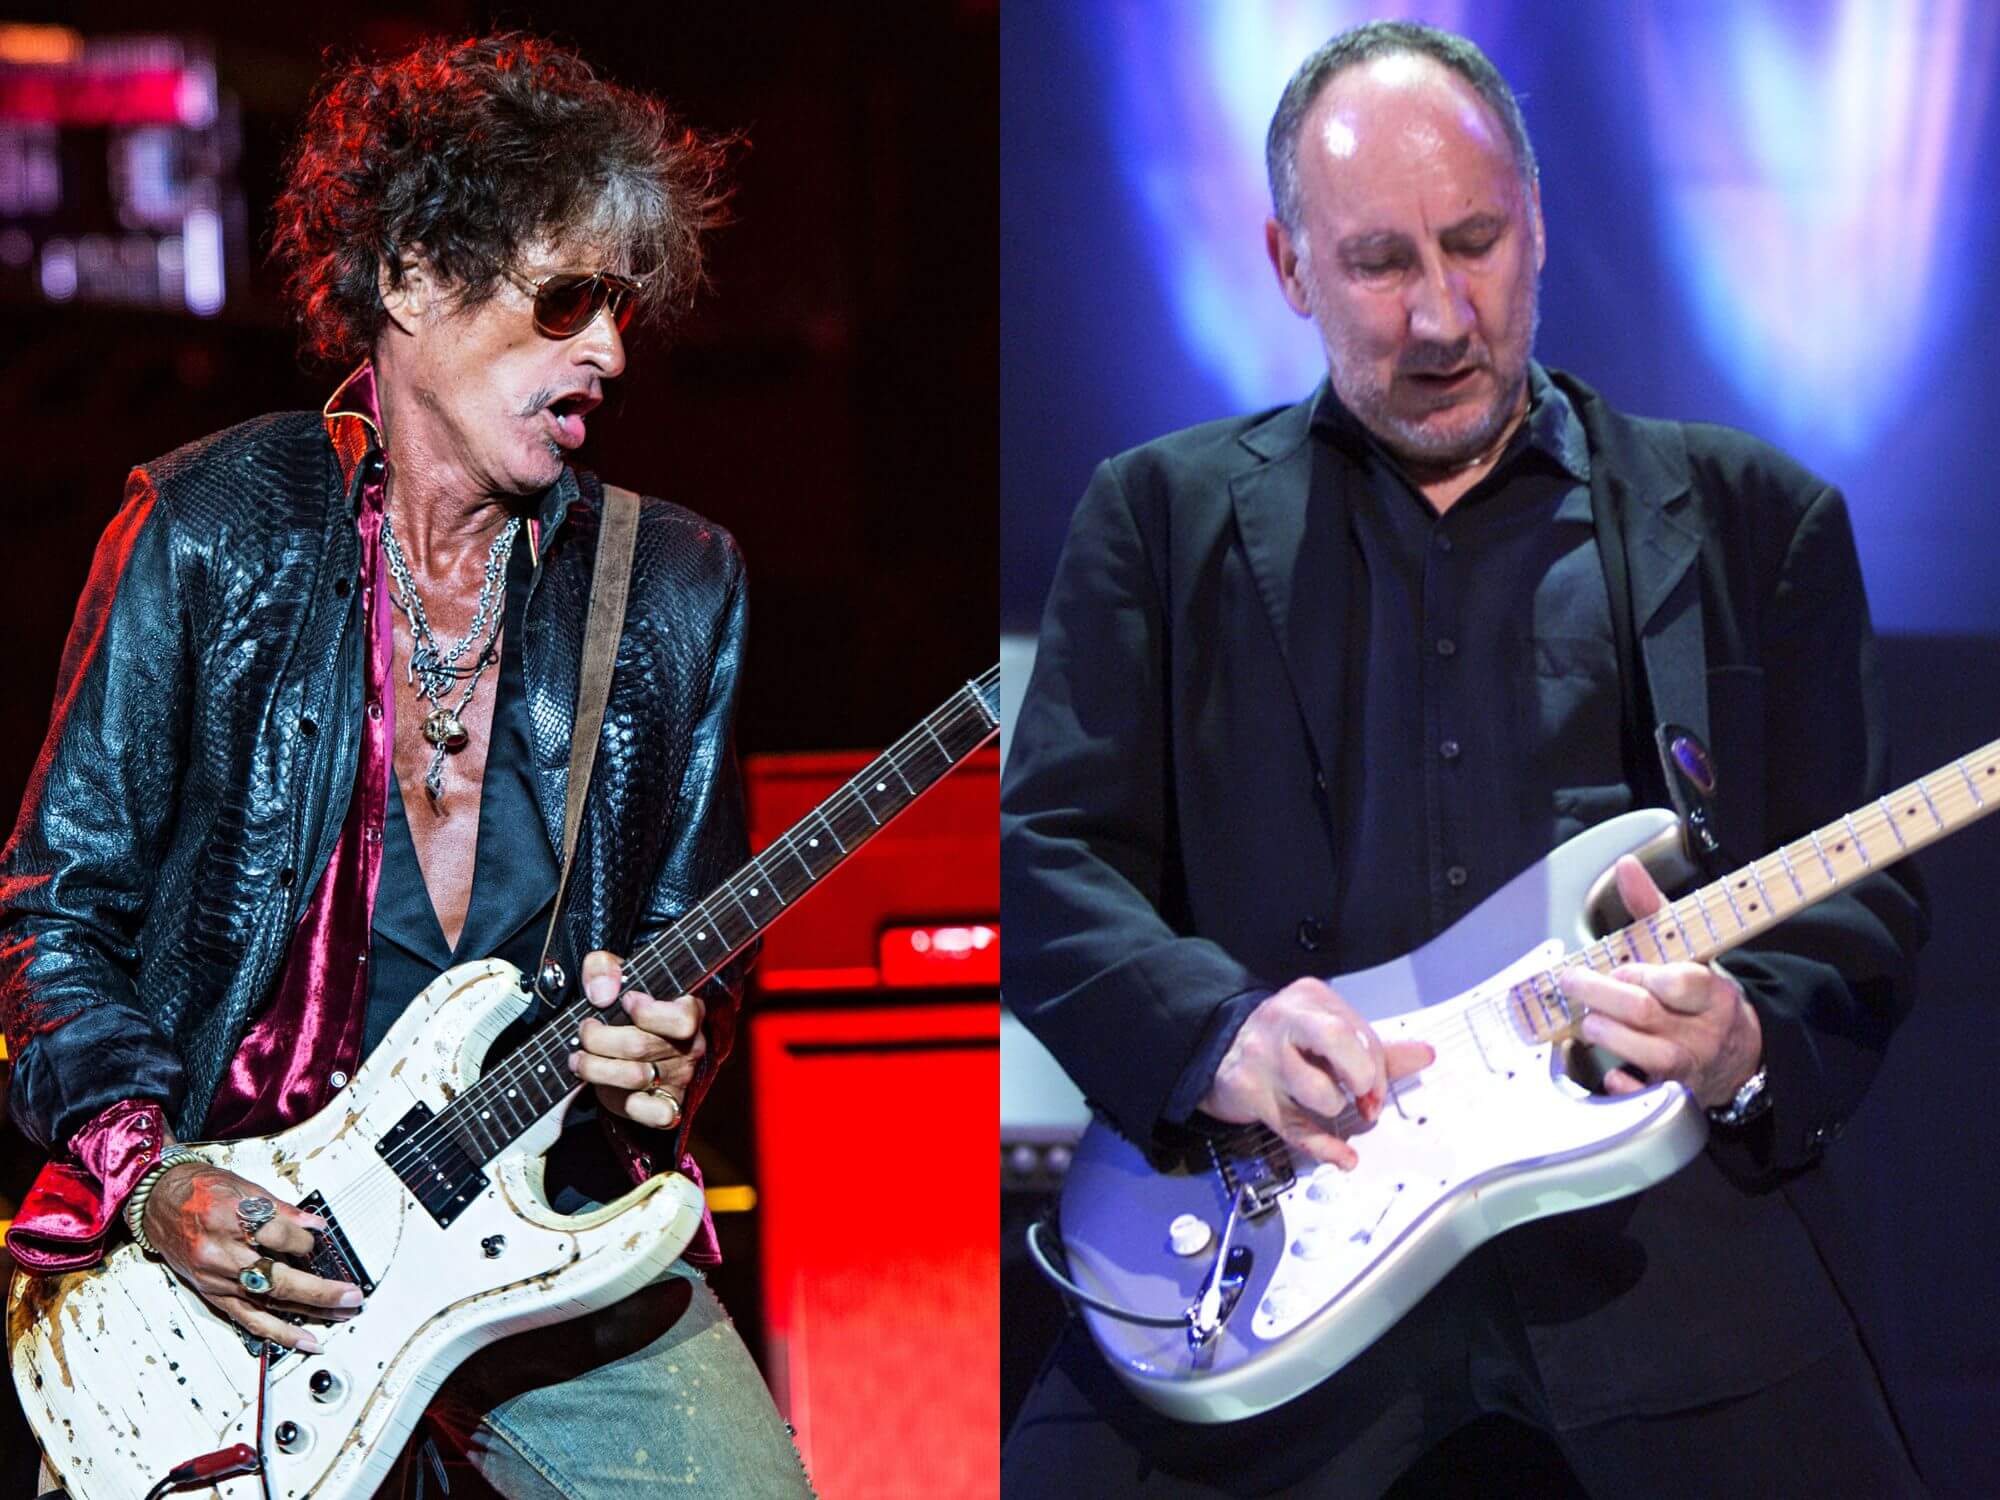 Aerosmith's Joe Perry and The Who's Pete Townshend onstage